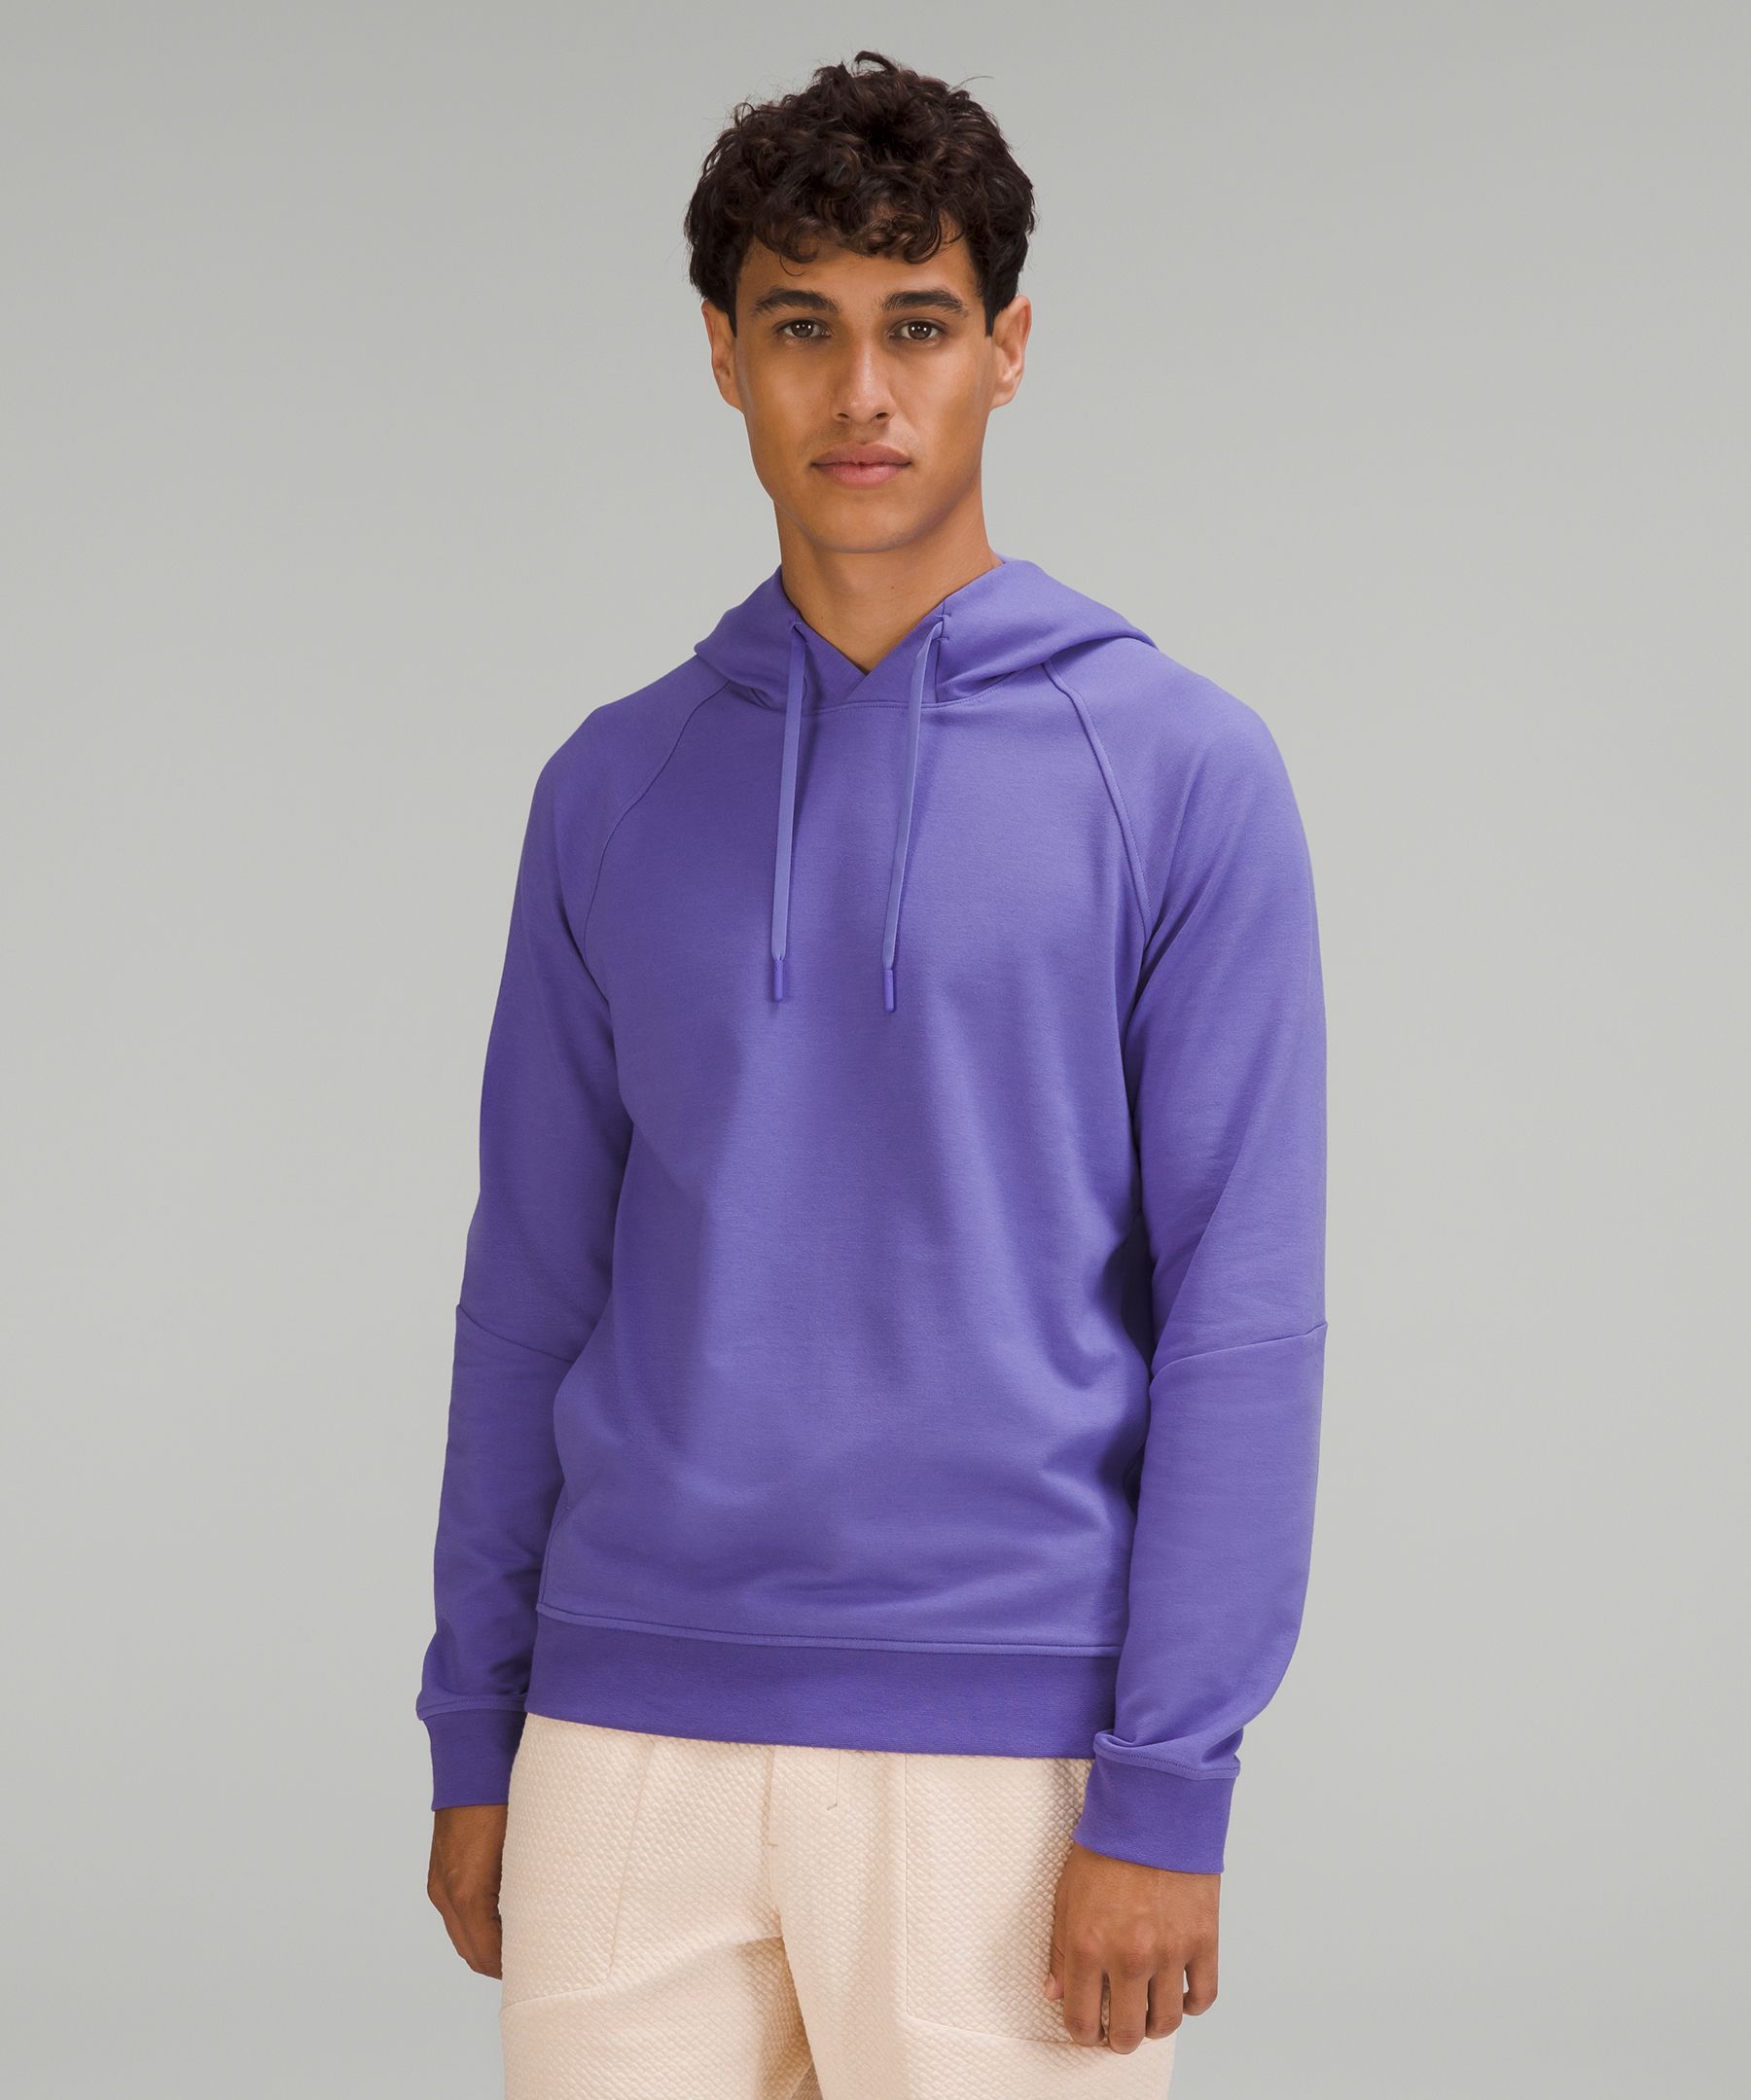 Lululemon City Sweat Pullover Hoodie French Terry In Charged Indigo